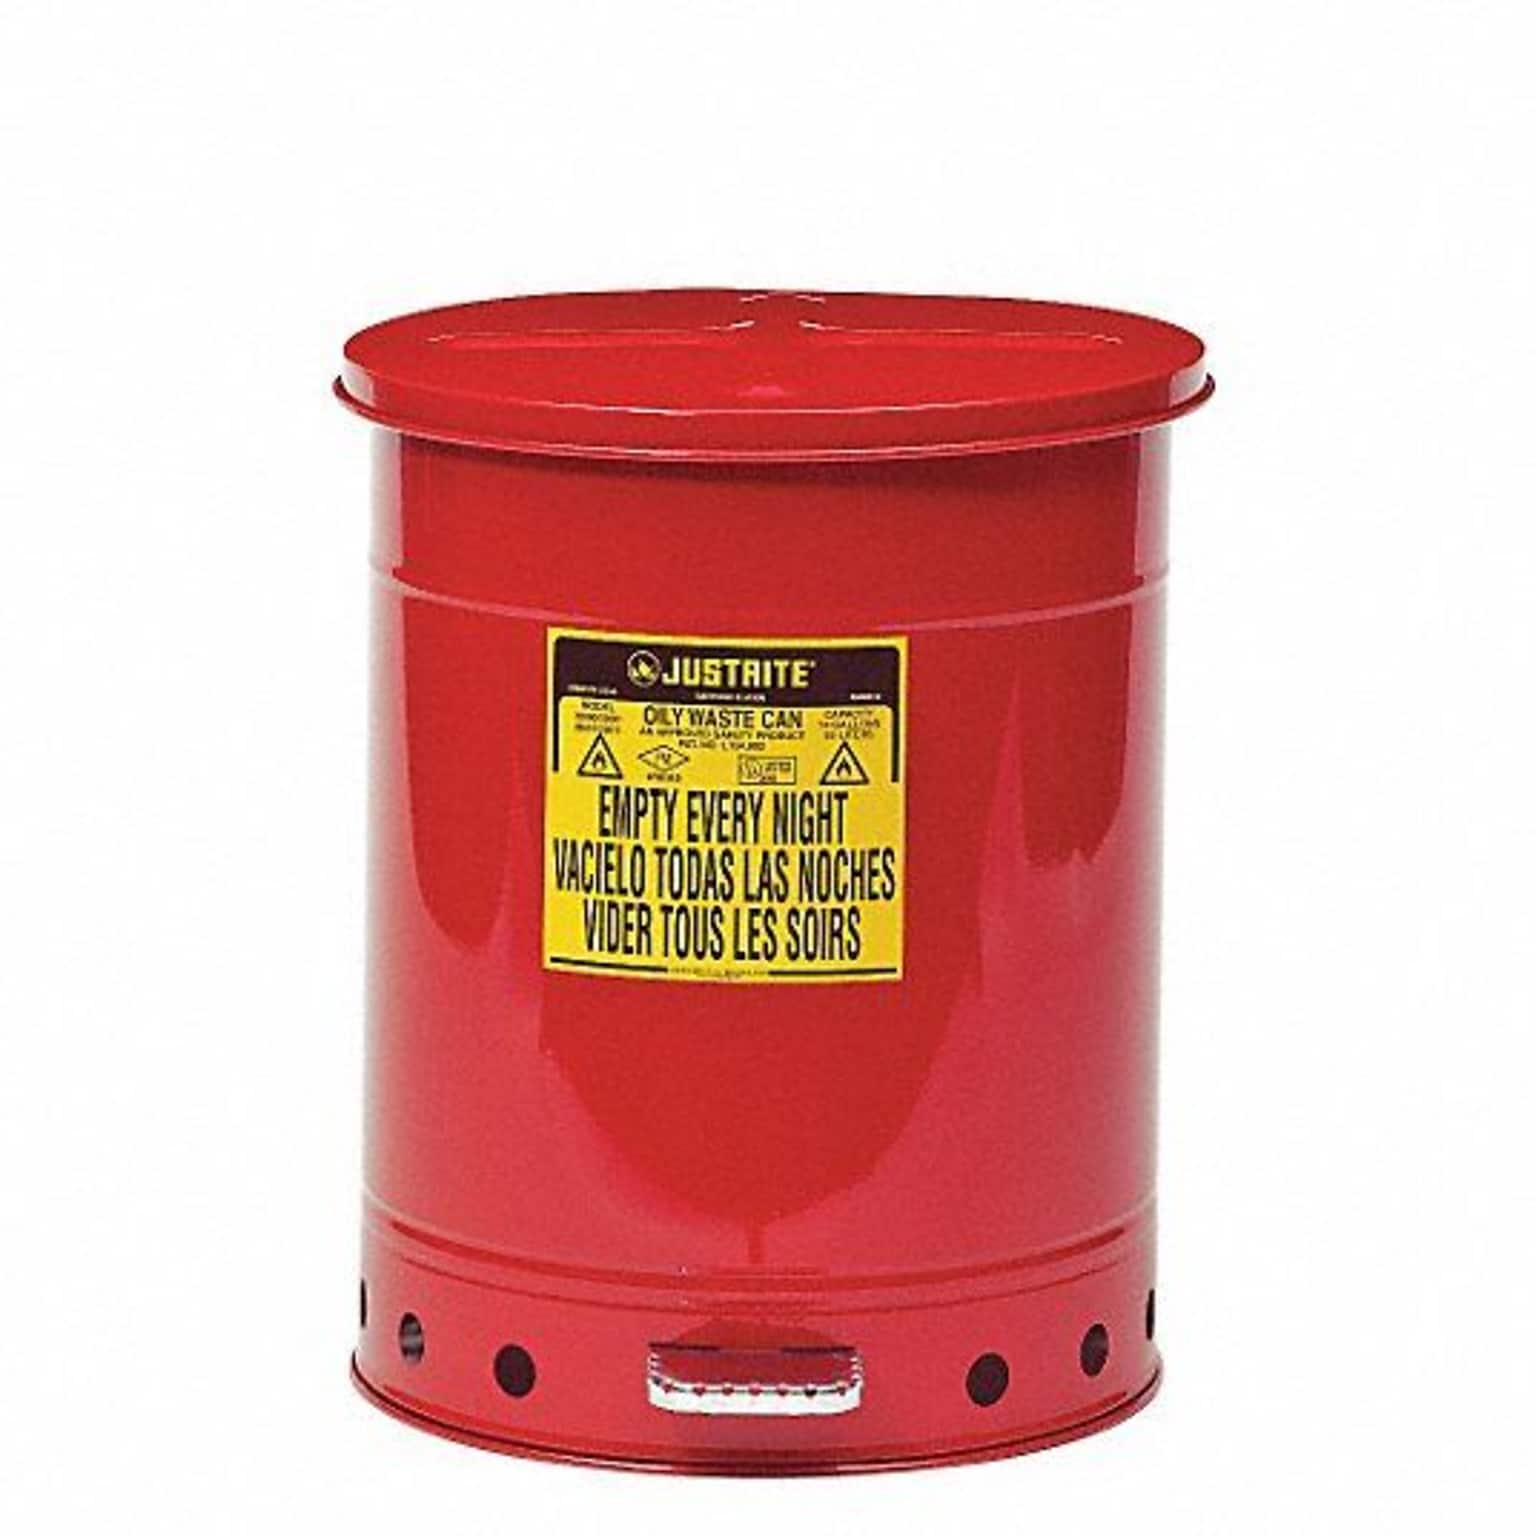 Justrite Oily Waste Can With Foot-Operated Self-Closing Cover, UL, Red, Capacity 14 Gallons